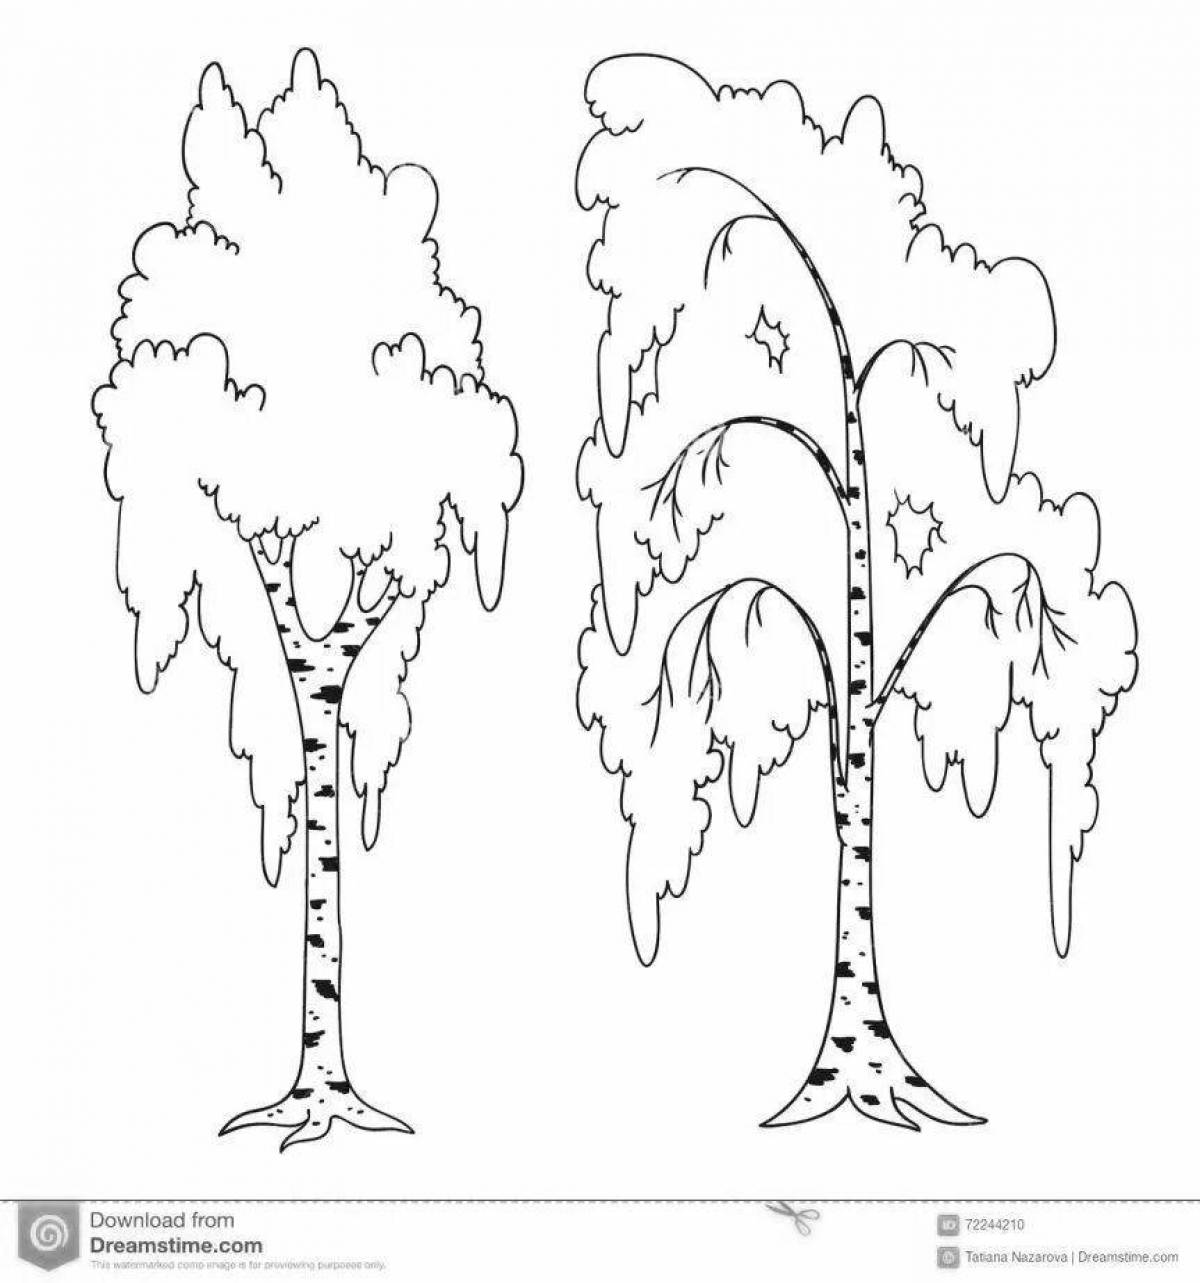 Luxury birch grove coloring book for children